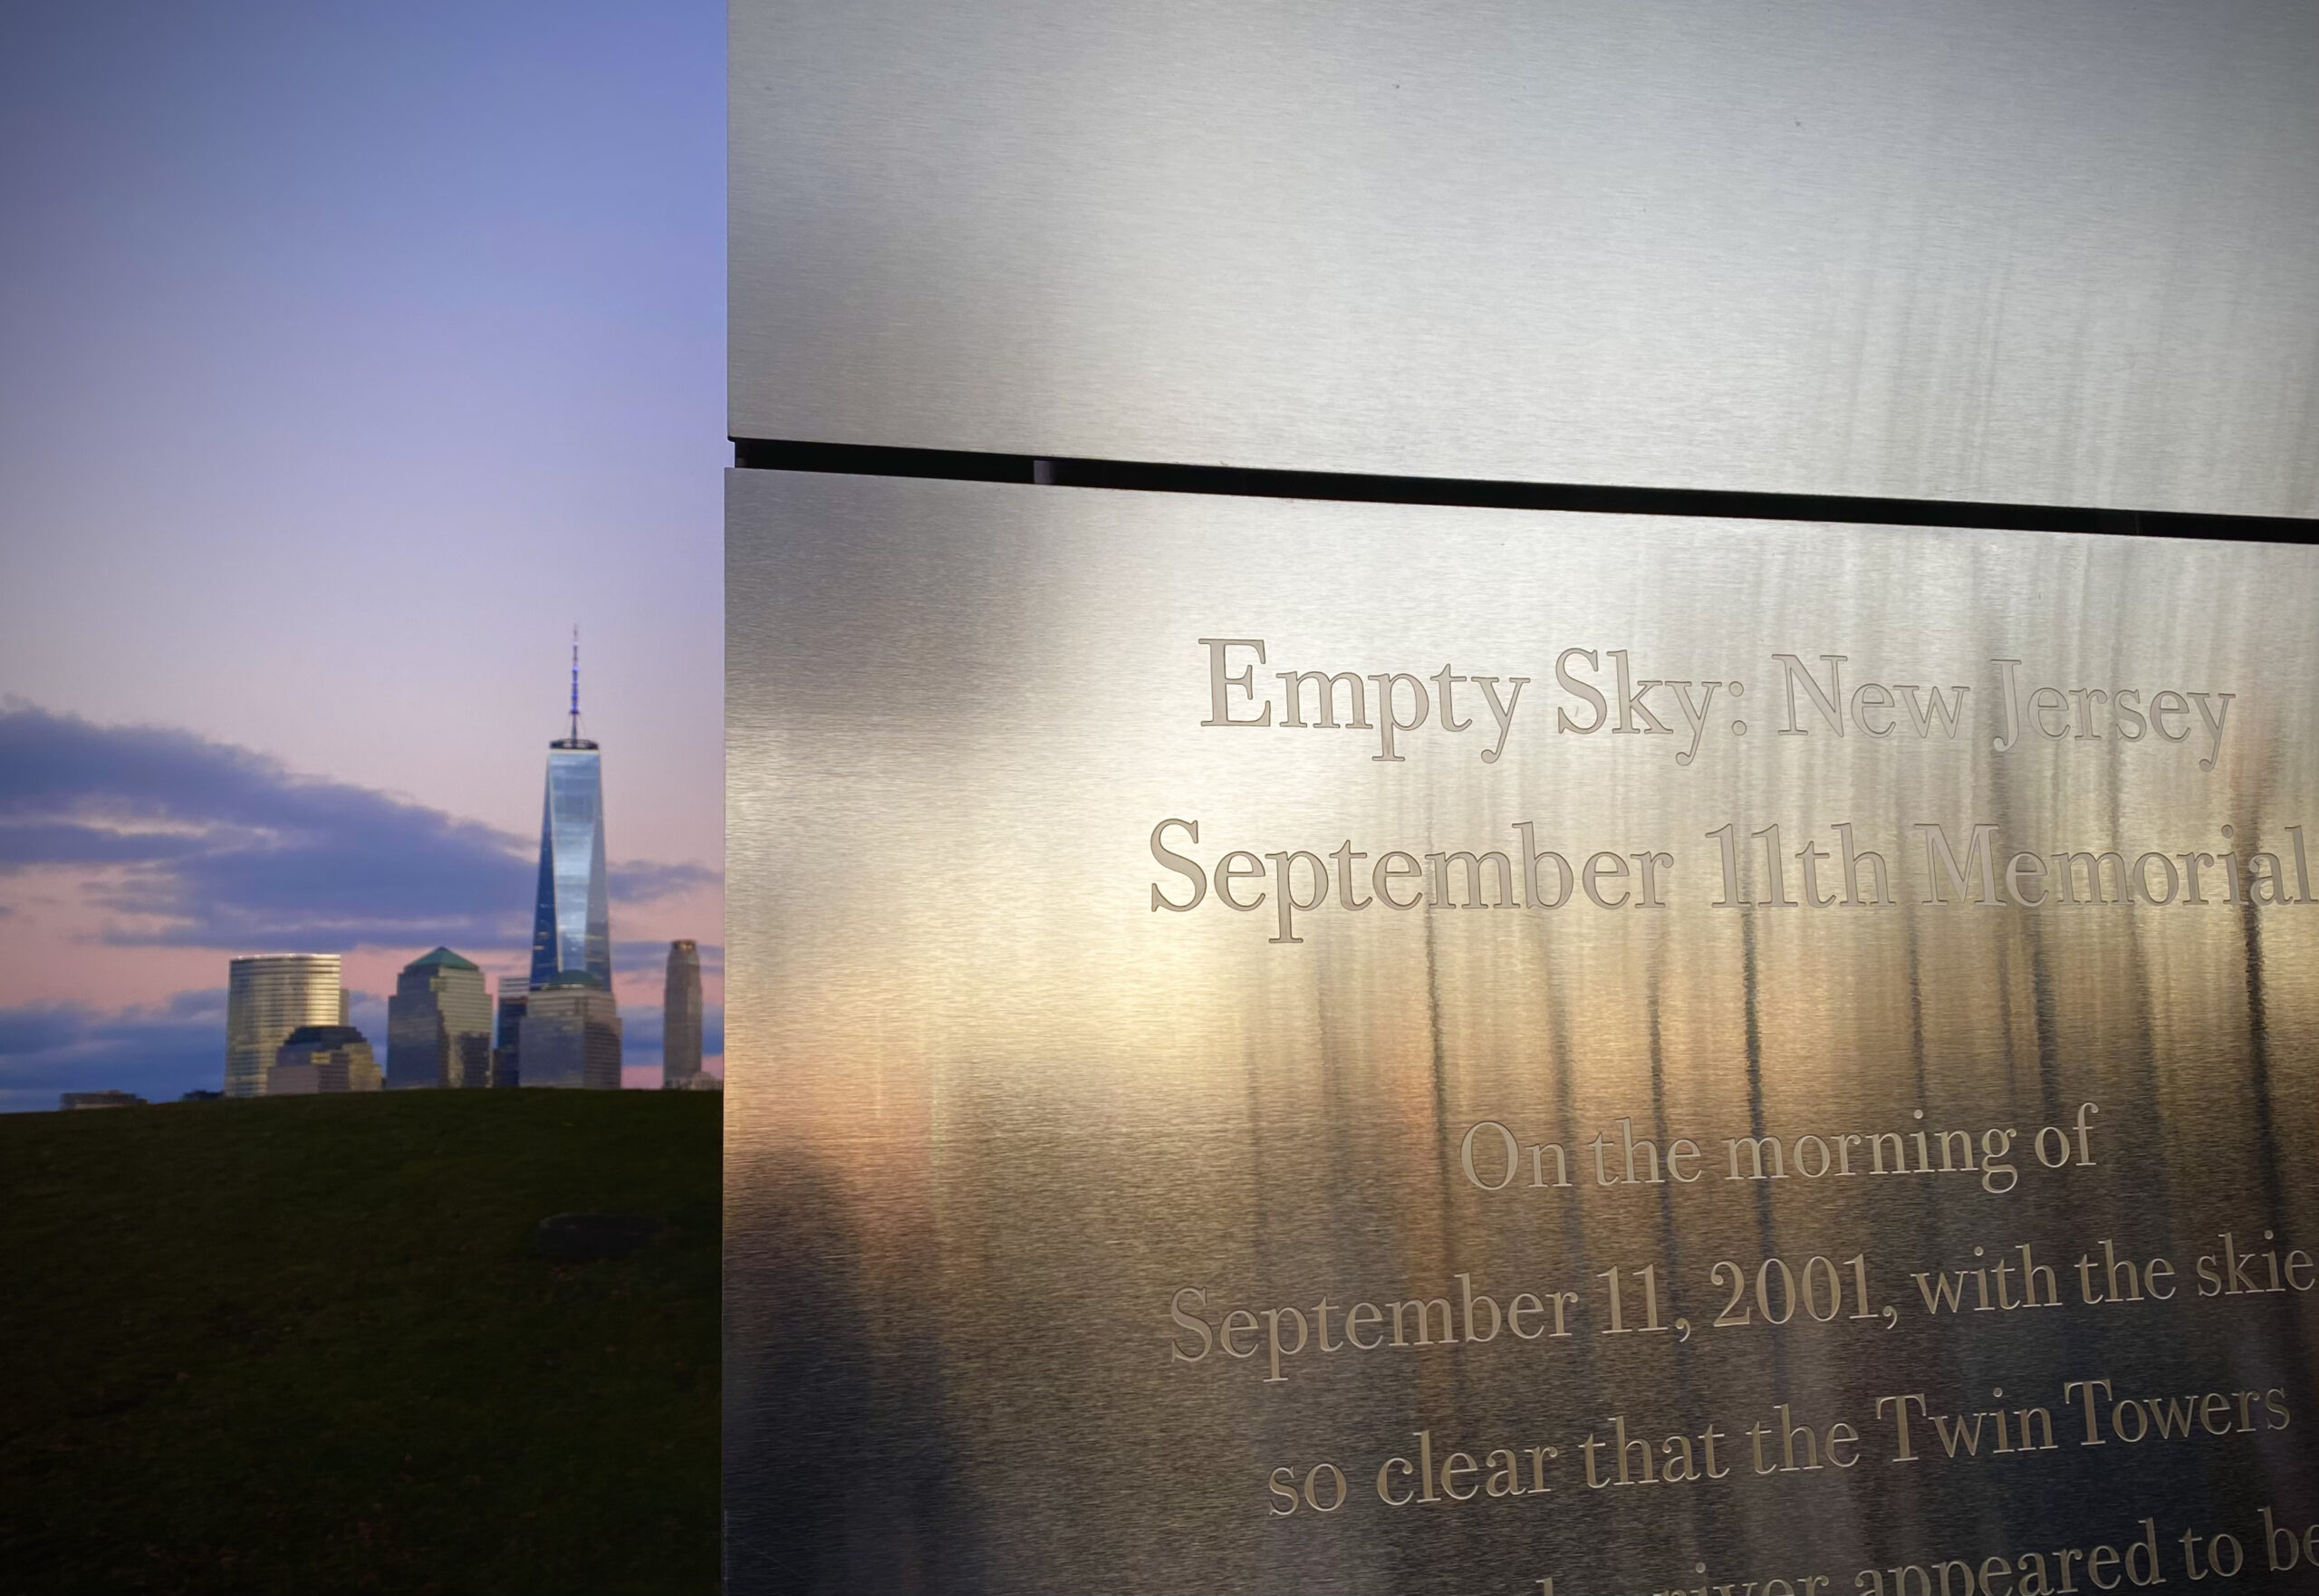 In the foreground on the right is a memorial for 9-11 and on the left is Freedom Tower and a beautiful sunset. 